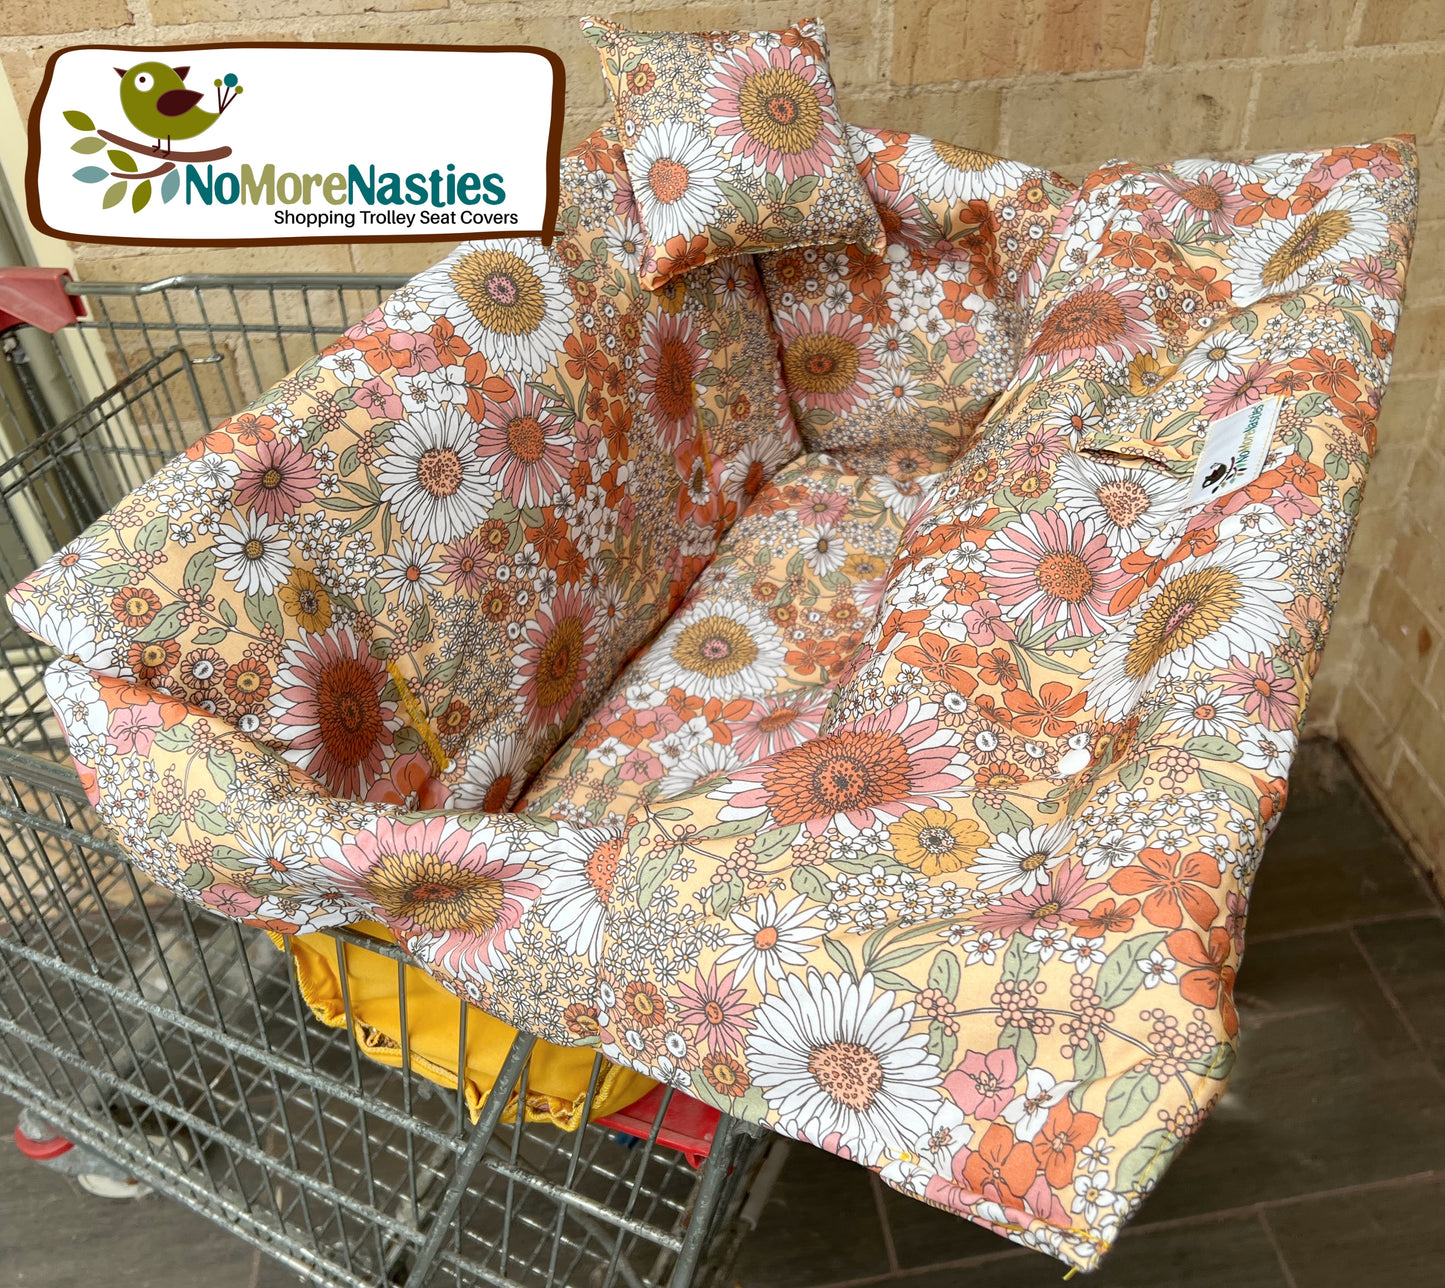 Dolly Deluxe Shopping Trolley Seat Cover